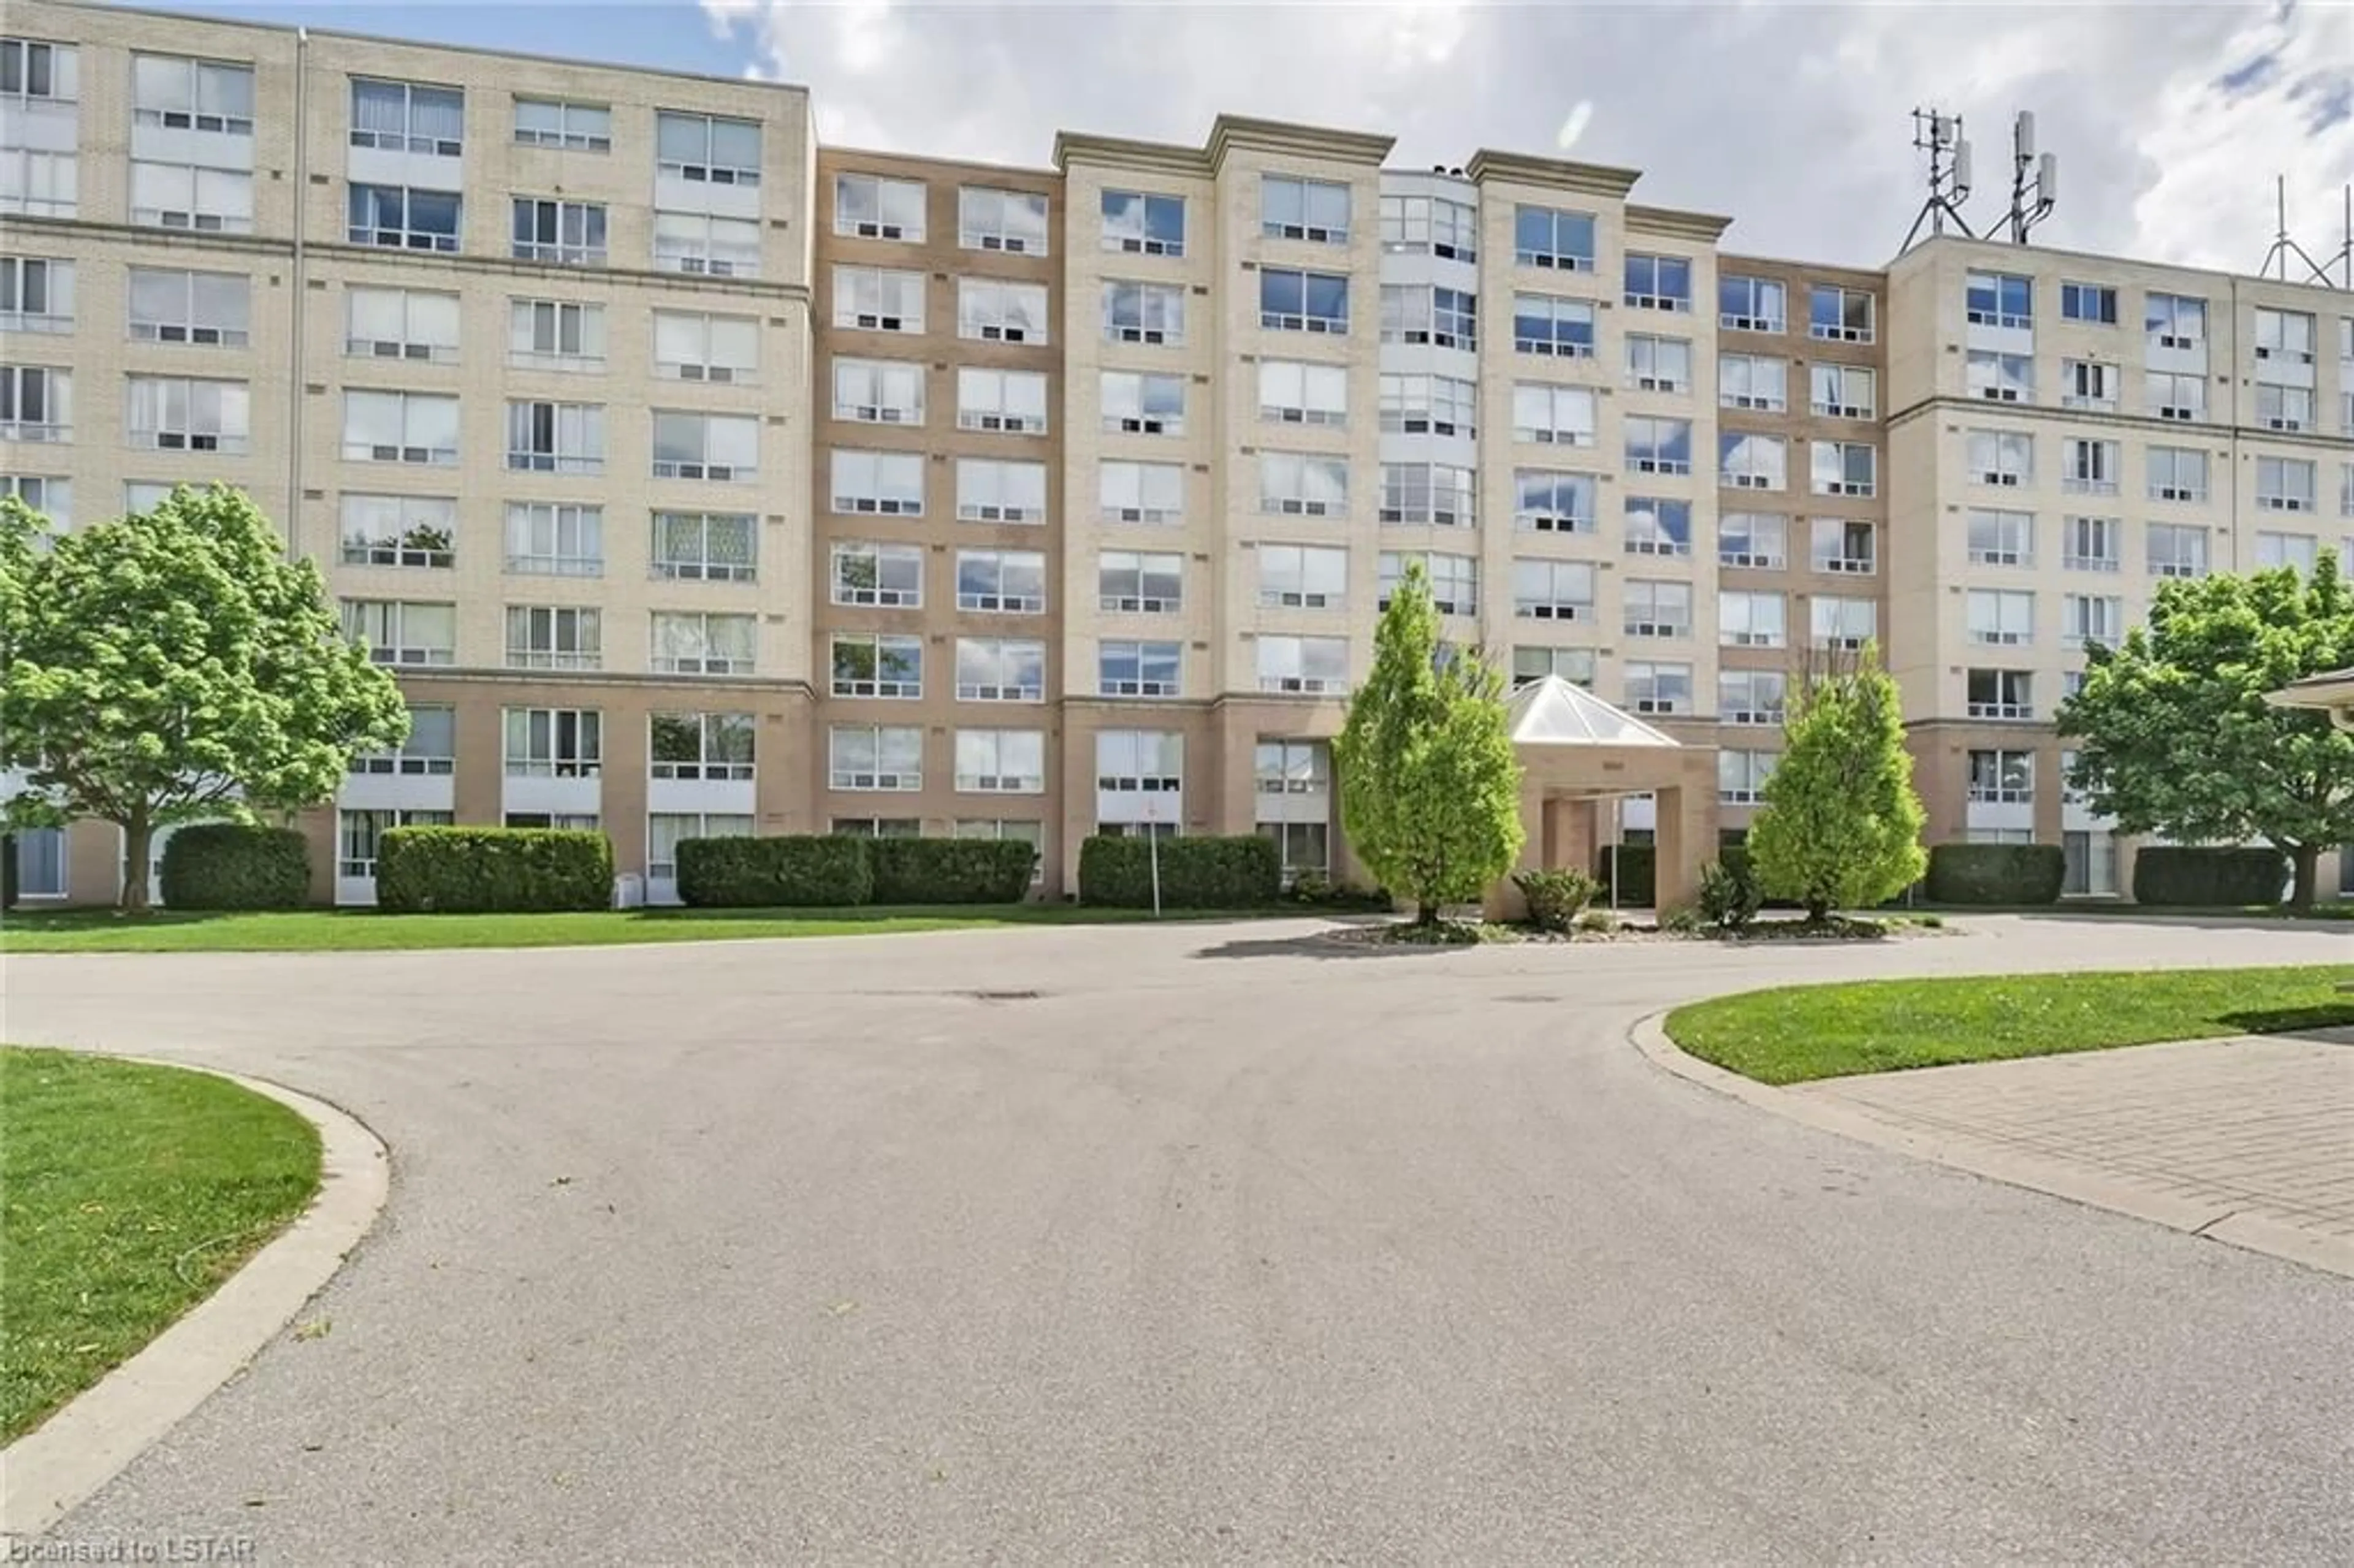 A pic from exterior of the house or condo for 1510 Richmond St #512, London Ontario N6G 4V2